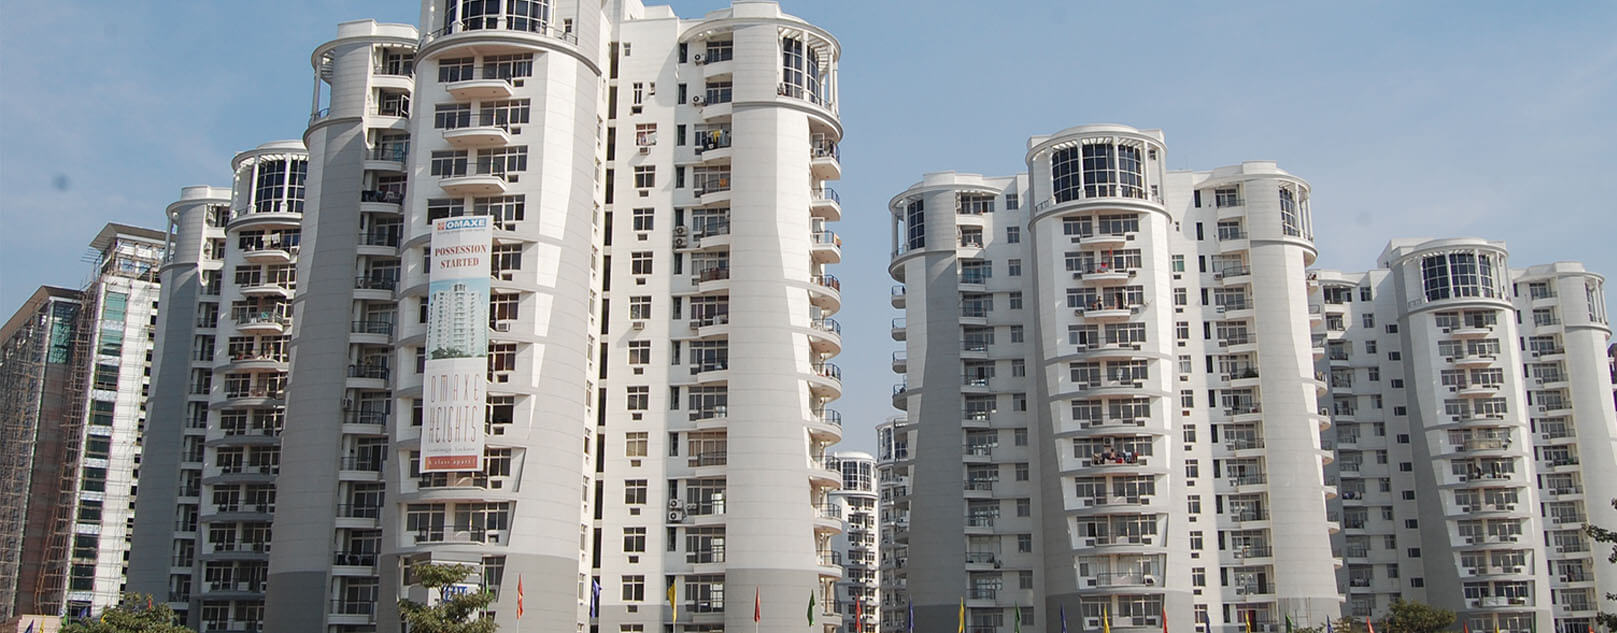 Omaxe Heights Lucknow